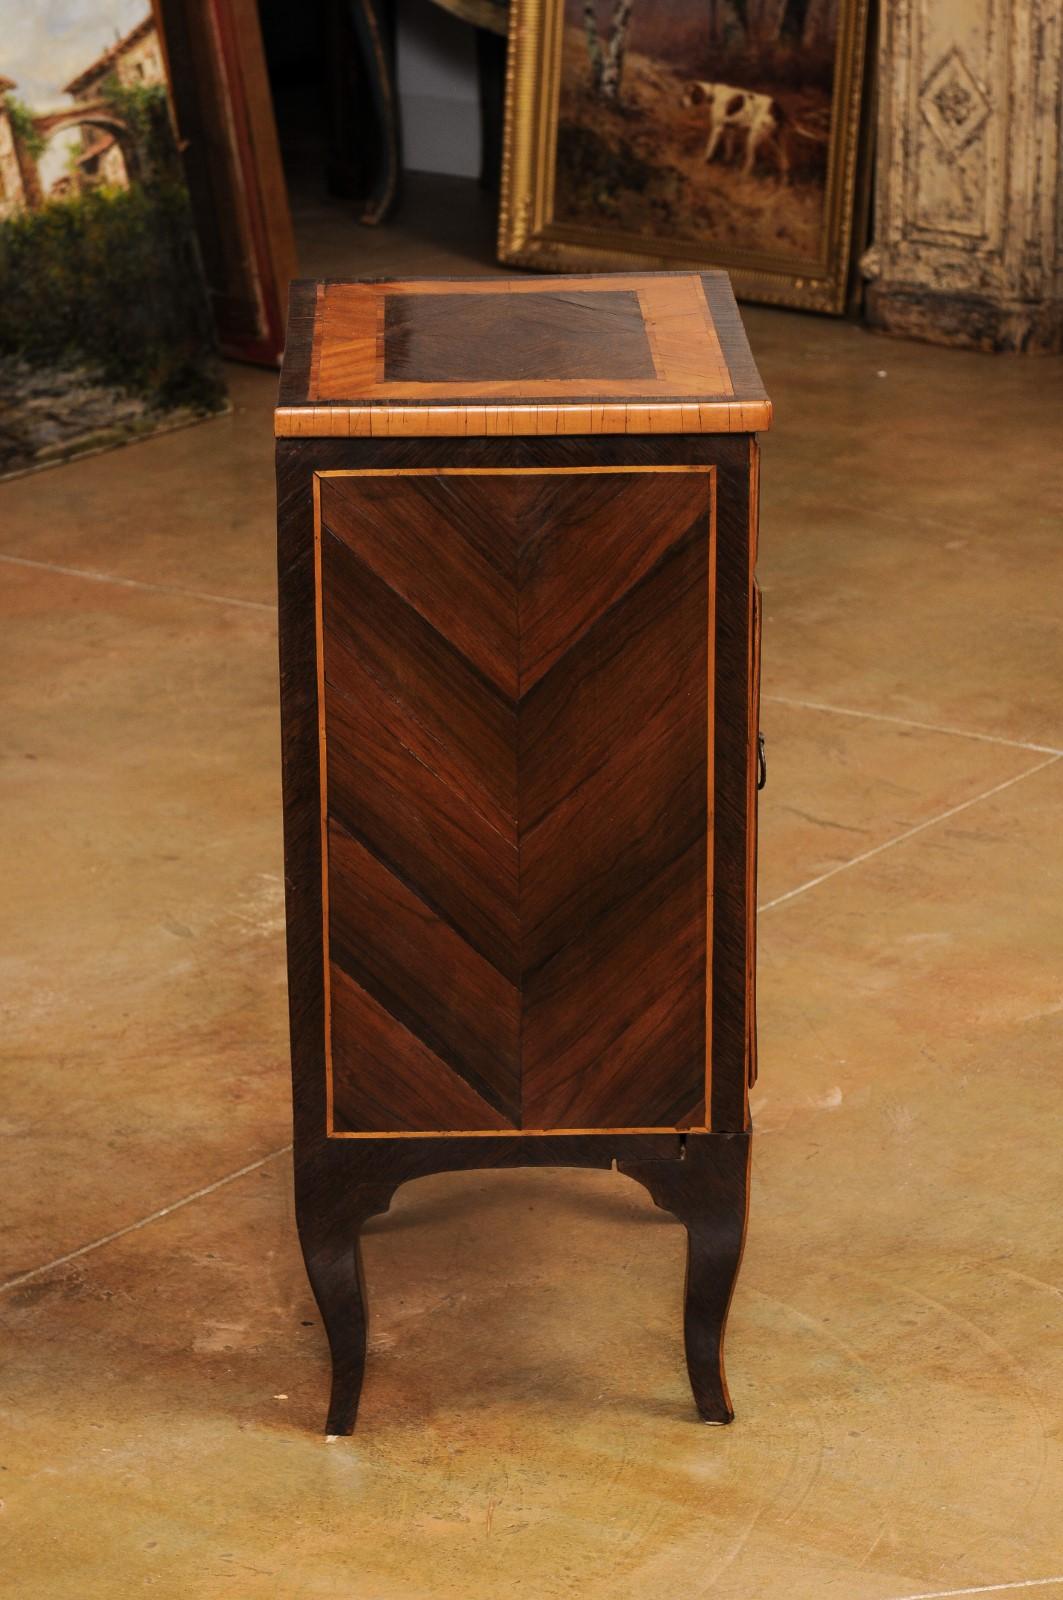 Italian 19th Century Bedside Table with Inlaid Décor, Single Drawer and Door For Sale 1